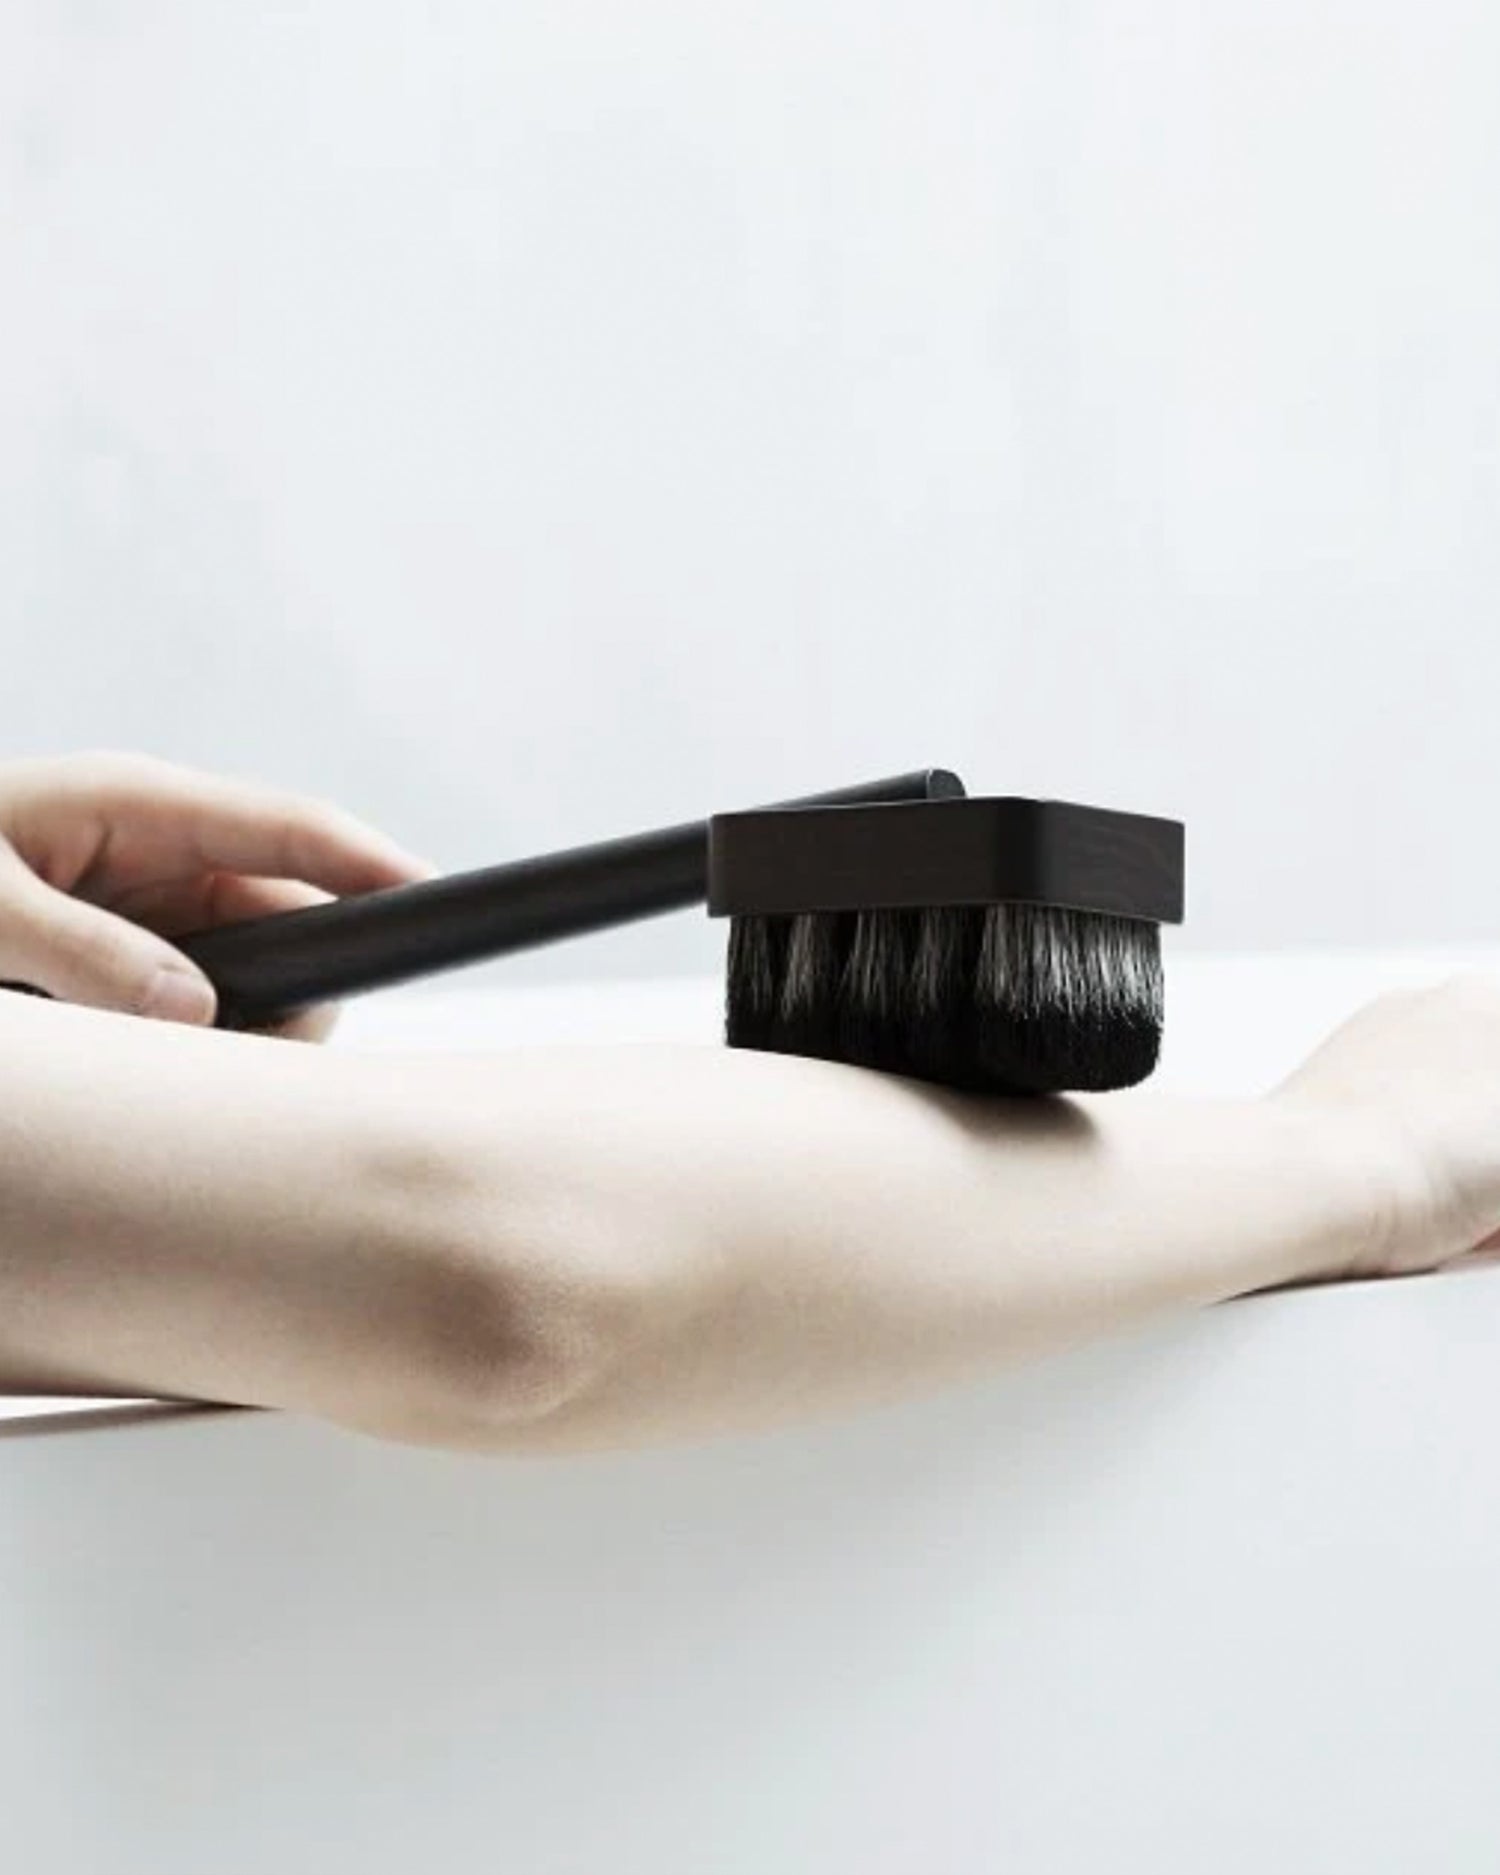 In situation image of hand holding dark long wooden jiva body brush by Shaquda on arm against white background.